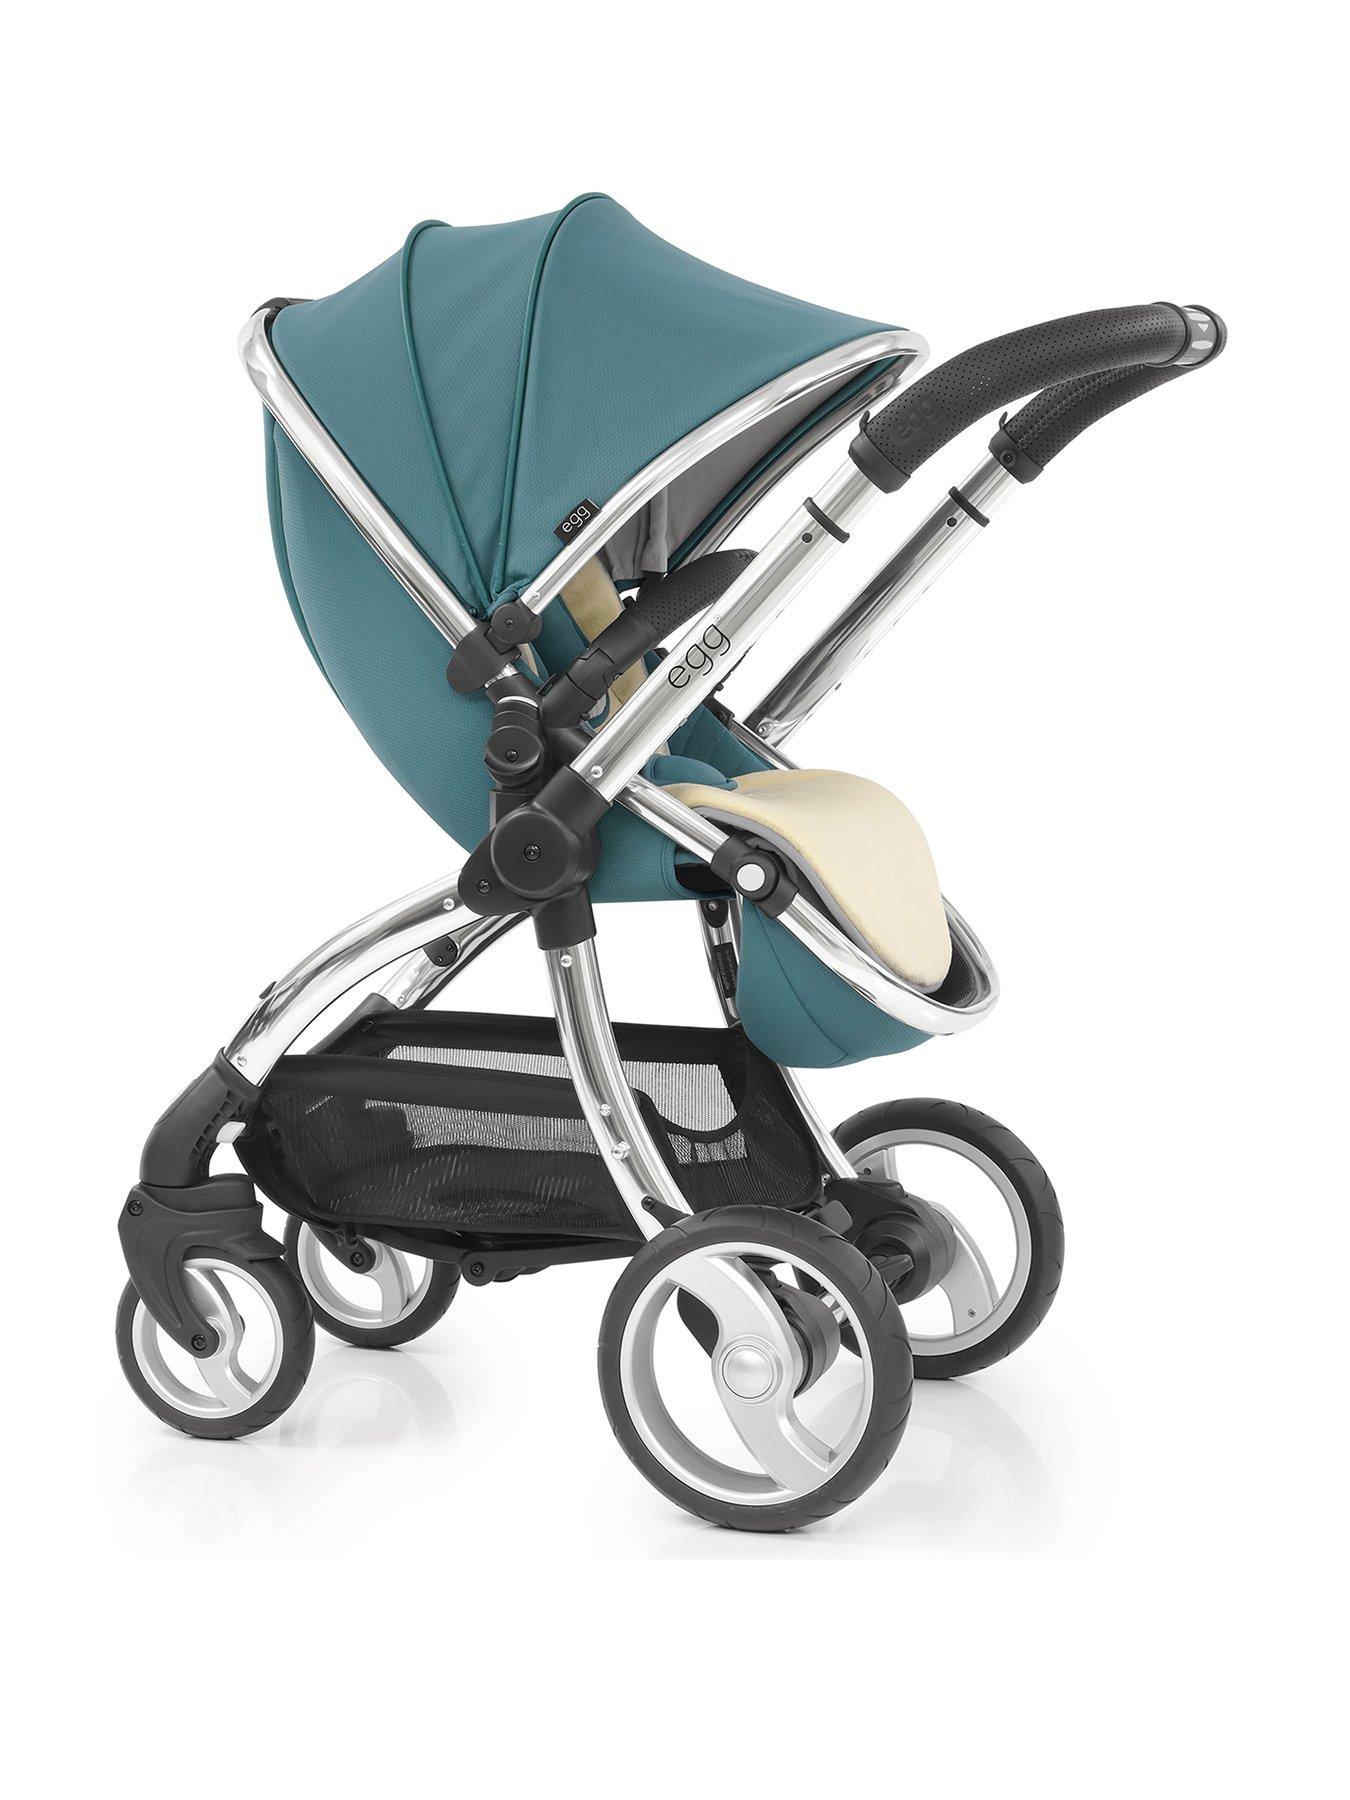 front and rear facing pushchair